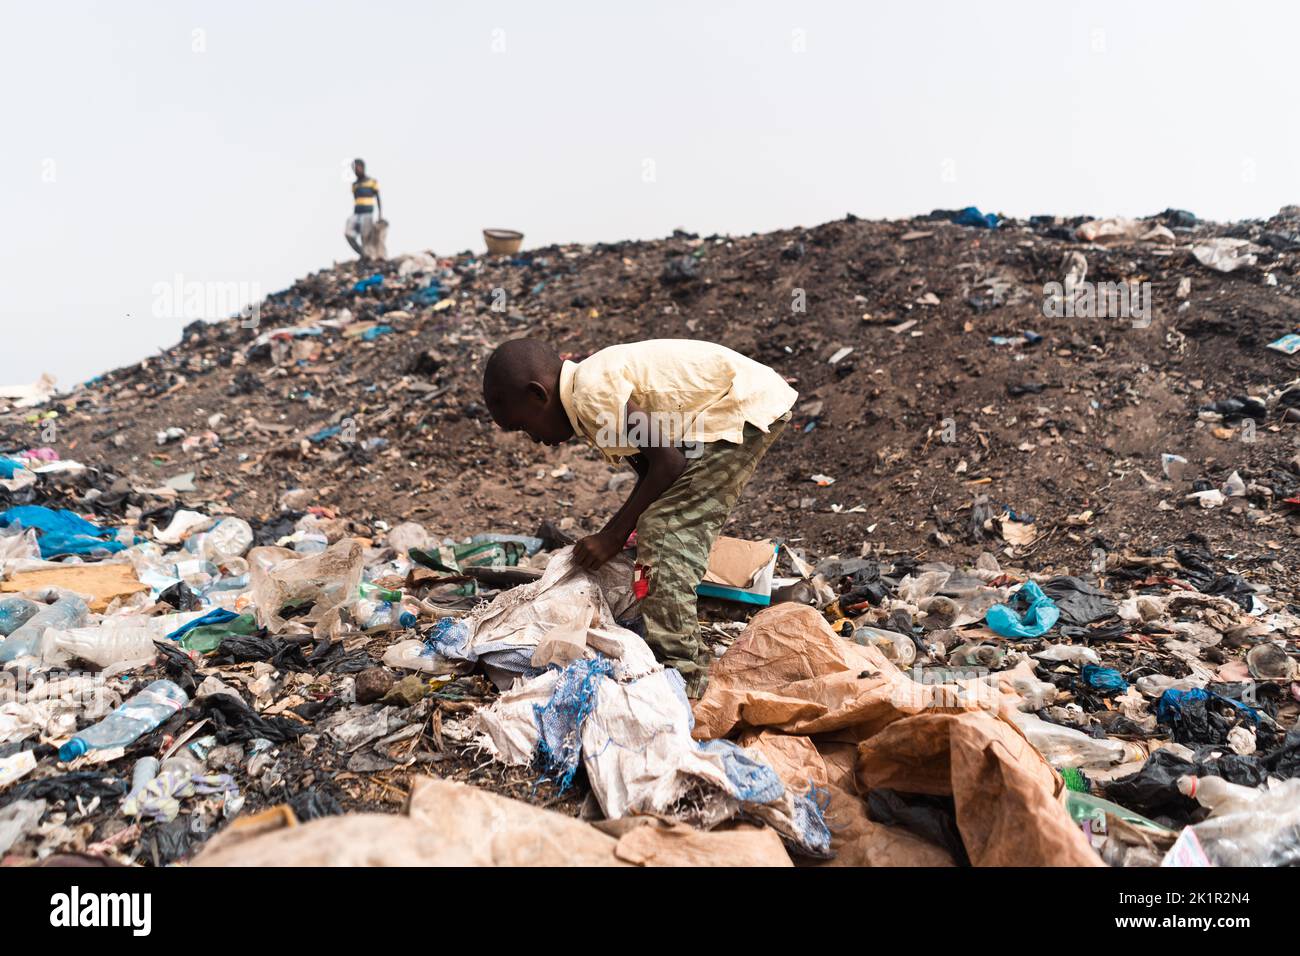 Small African boy busy recycling objects amidst heaps of plastic waste and dirt in an urban landfill; child labor concept Stock Photo